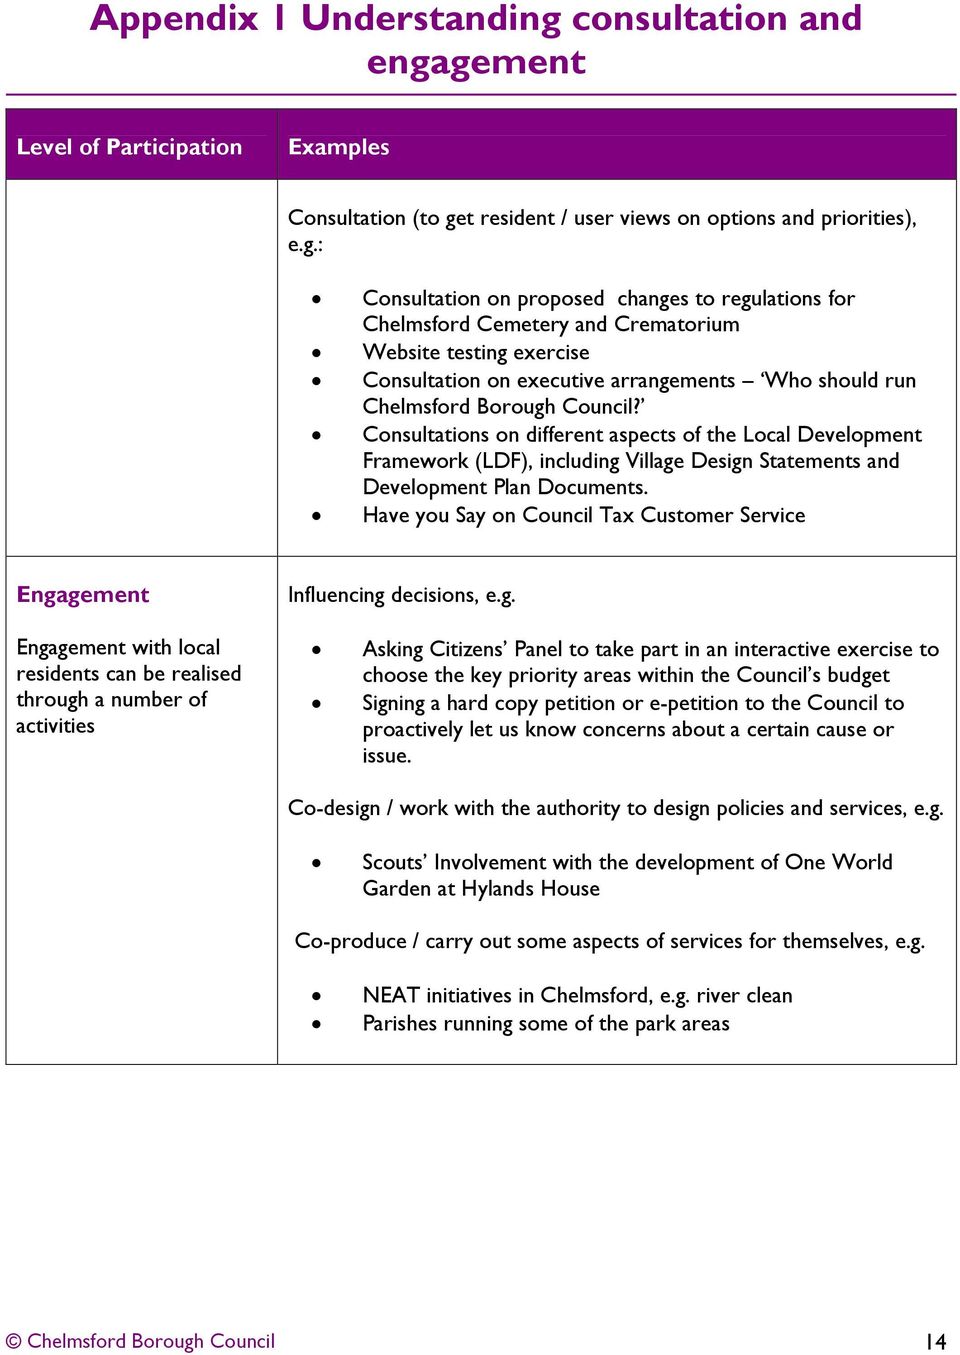 gement Level of Participation Examples Consultation (to get resident / user views on options and priorities), e.g.: Consultation on proposed changes to regulations for Chelmsford Cemetery and Crematorium Website testing exercise Consultation on executive arrangements Who should run Chelmsford Borough Council?